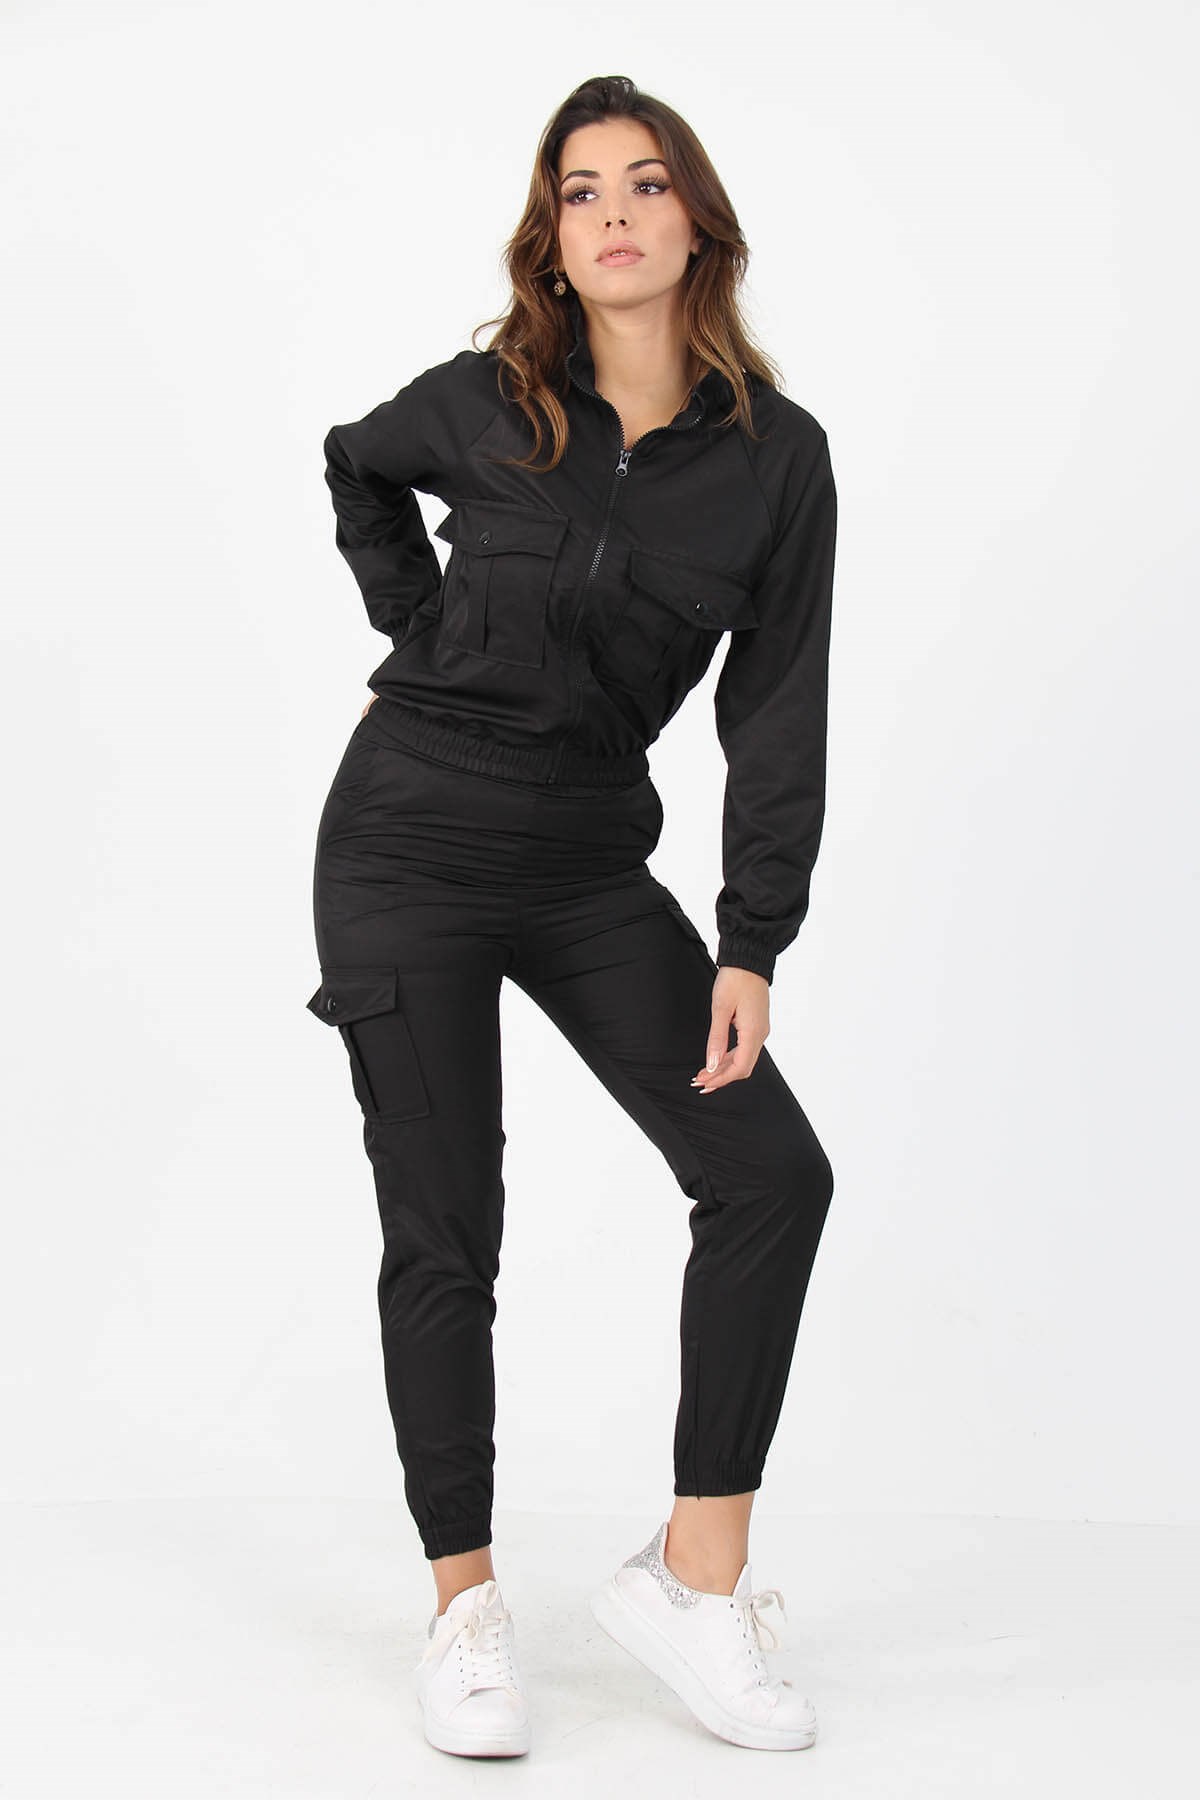 A model wears 34997 - Tracksuit - Black, wholesale Tracksuit of Mode Roy to display at Lonca